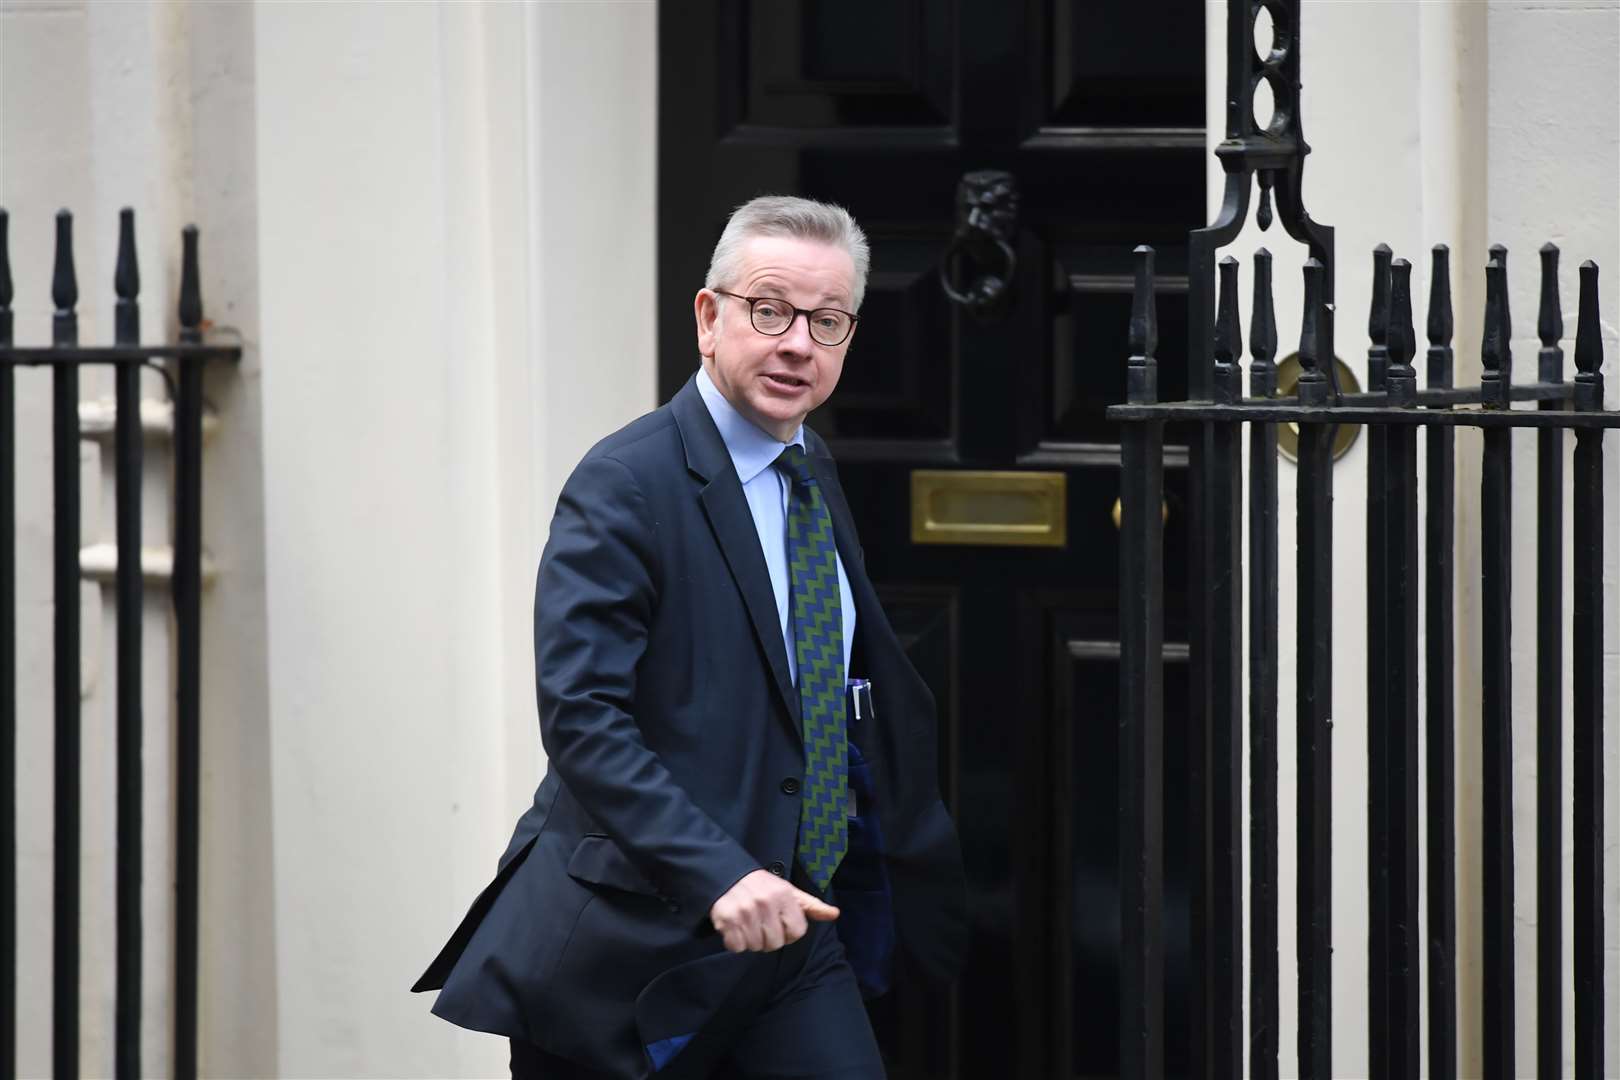 Screening will be supported by electronic processes, Cabinet Office minister Michael Gove’s document says (Stefan Roussea/PA)